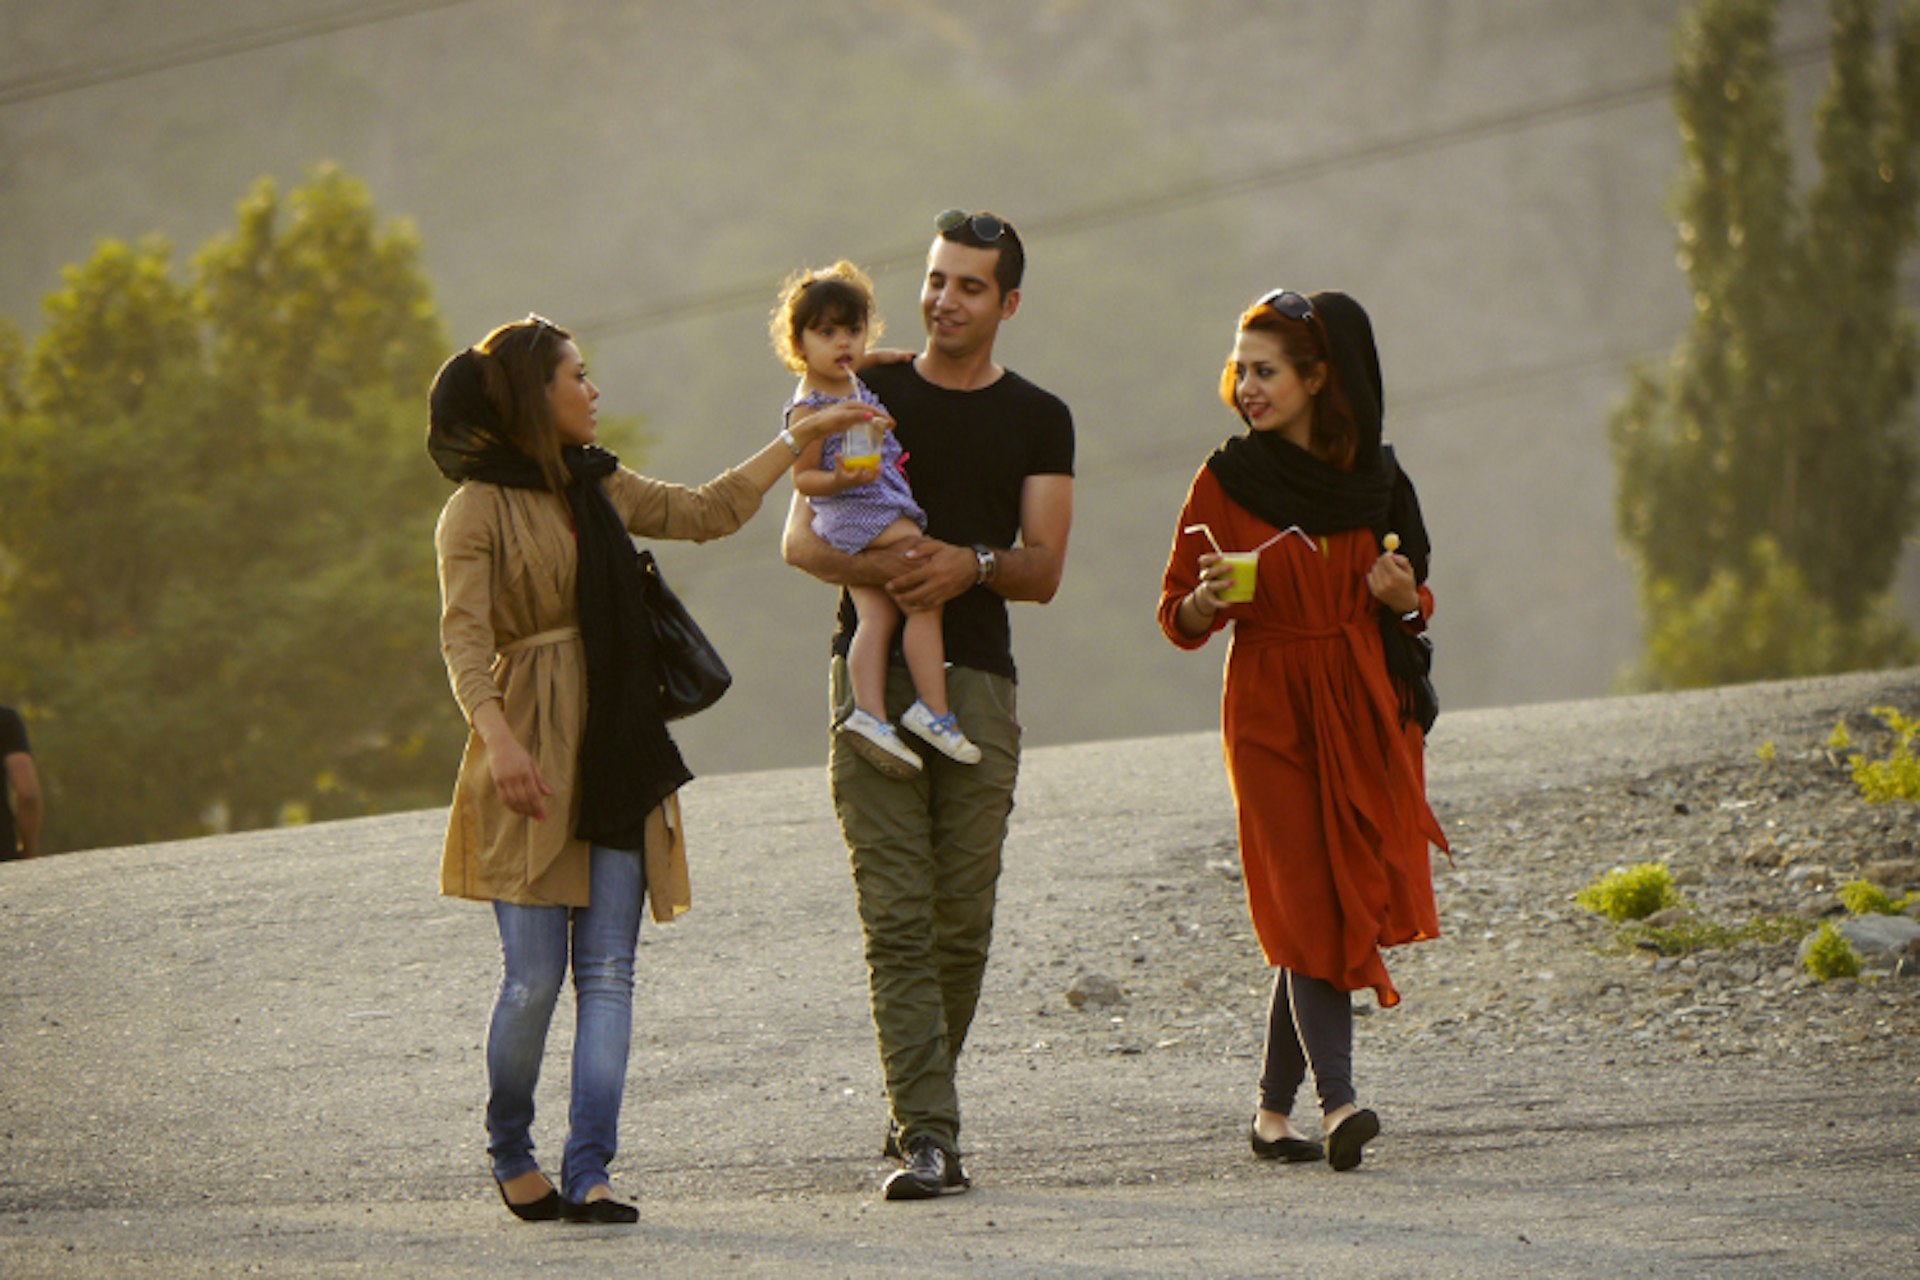 An Iranian family go for a stroll in Tehran. Image by Amos Chapple / Lonely Planet Images / Getty